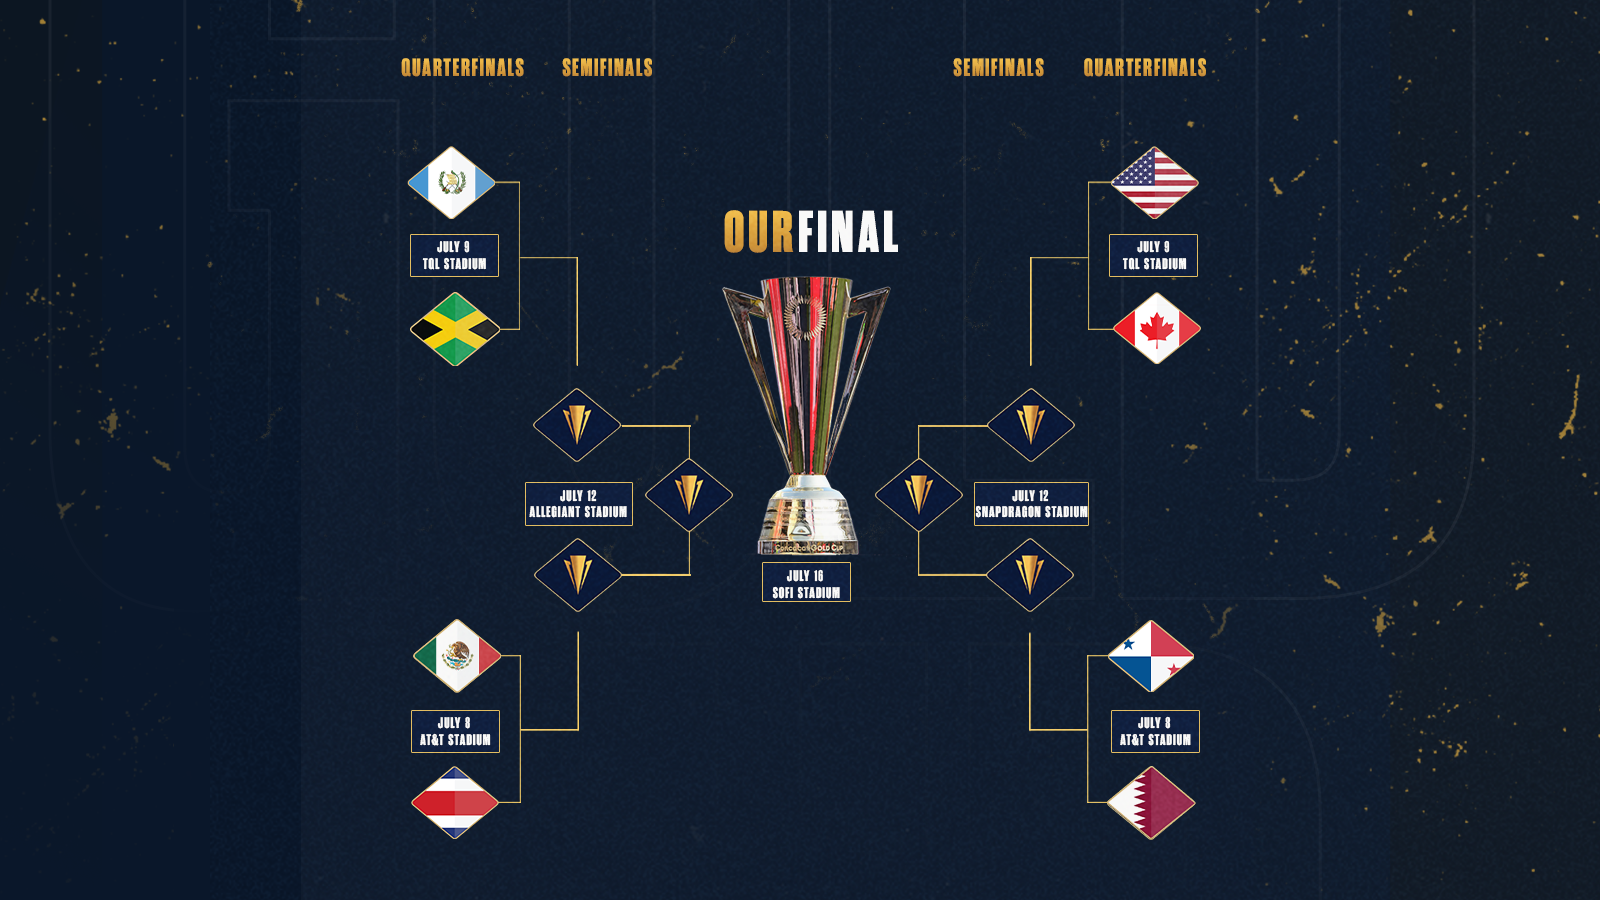 Dates Announced for 2023 Concacaf Gold Cup Prelims and Group Stage